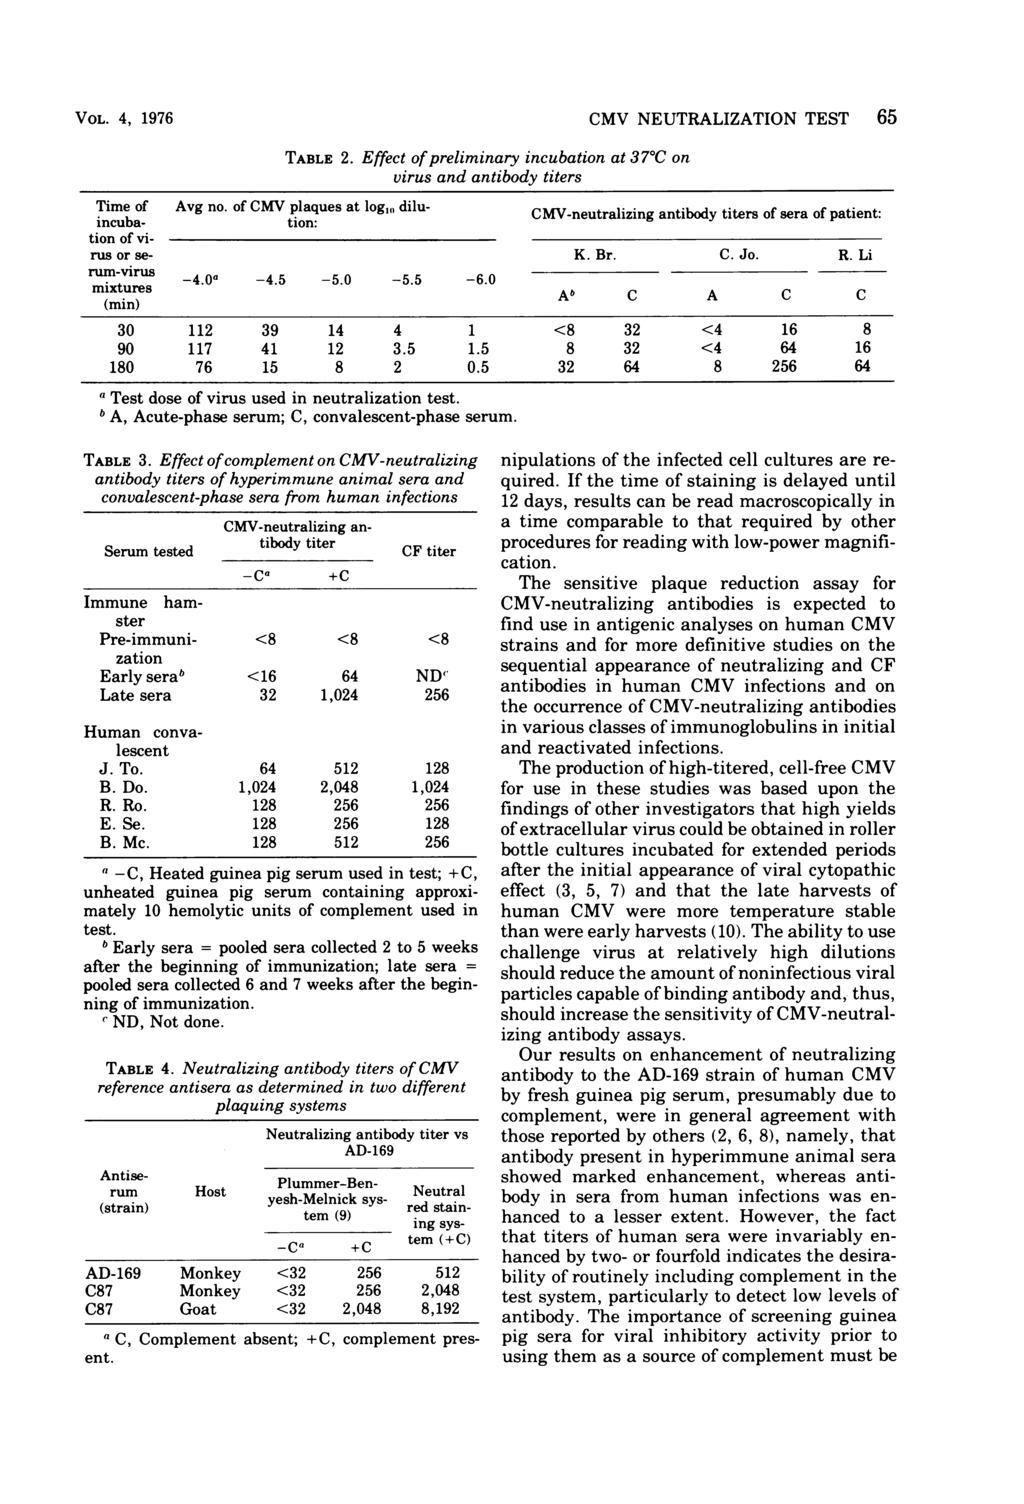 VOL. 4, 1976 TABLE 2. Effect ofpreliminary incubation at 37 C on virus and antibody titers CMV NEUTRALIZATION TEST 65 Time of Avg no.